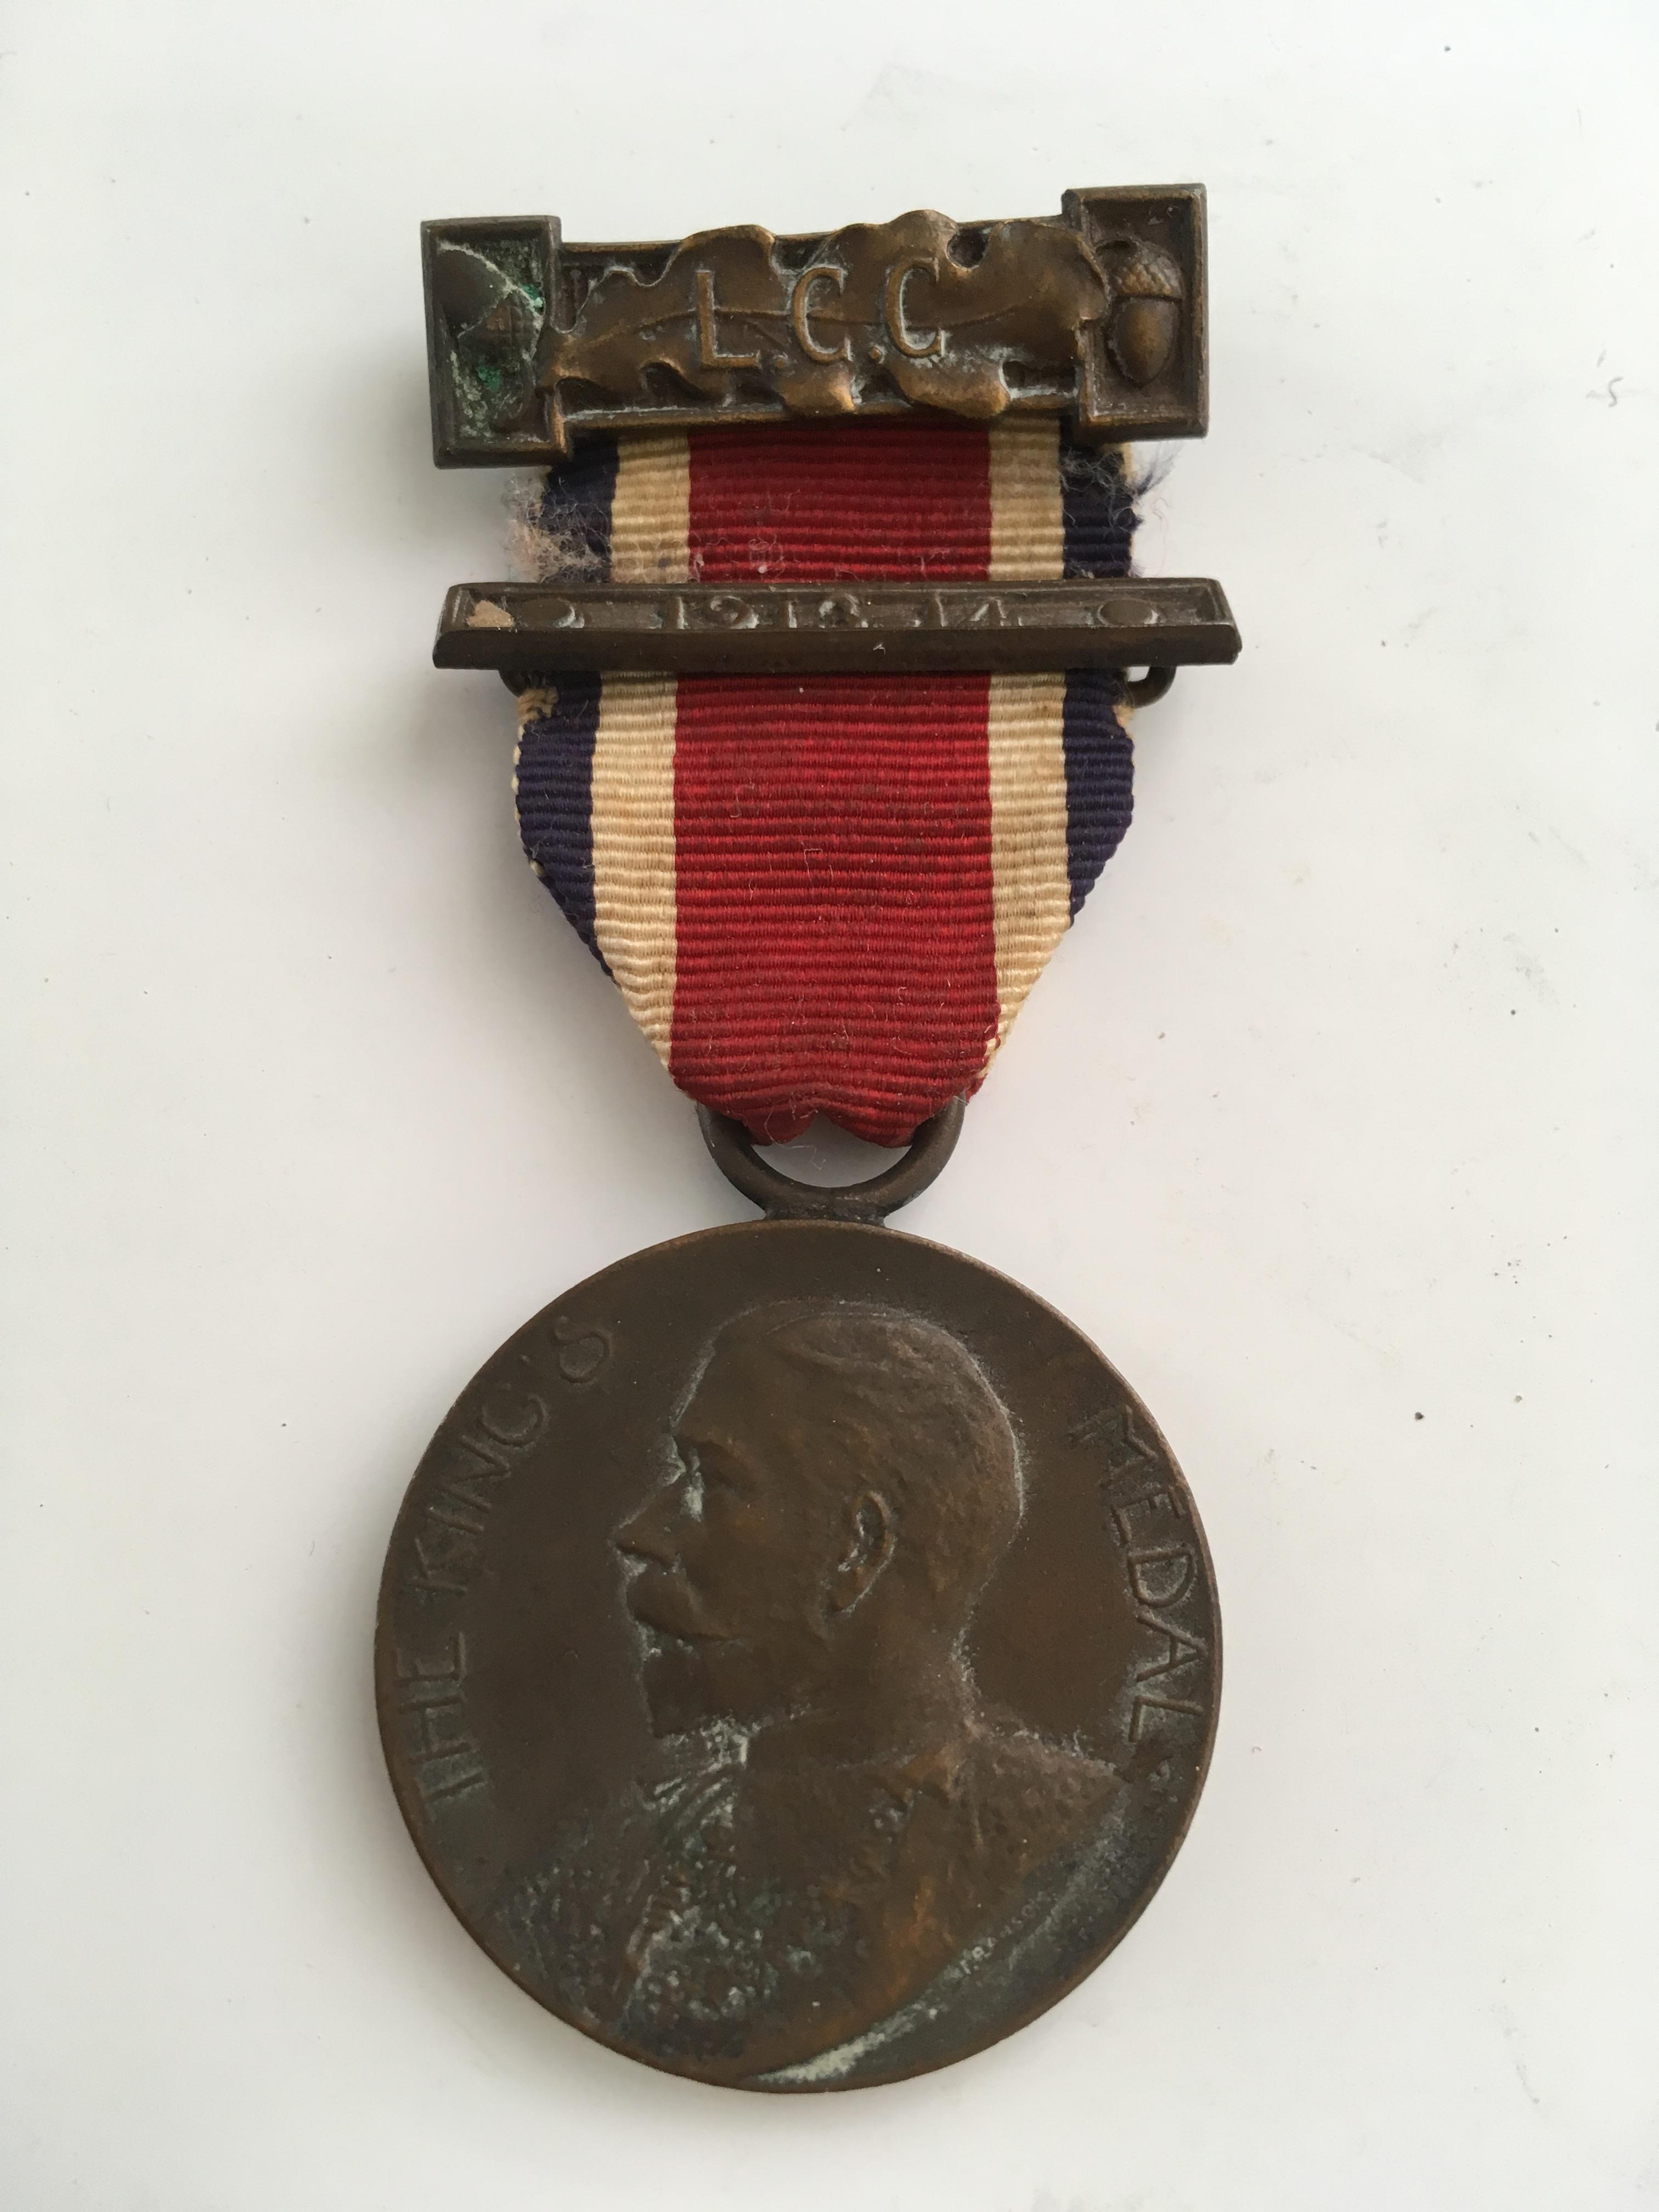 MEDALS: LONDON COUNTY COUNCIL 1913-14 KINGS MEDAL NAMED TO L. - Image 4 of 6